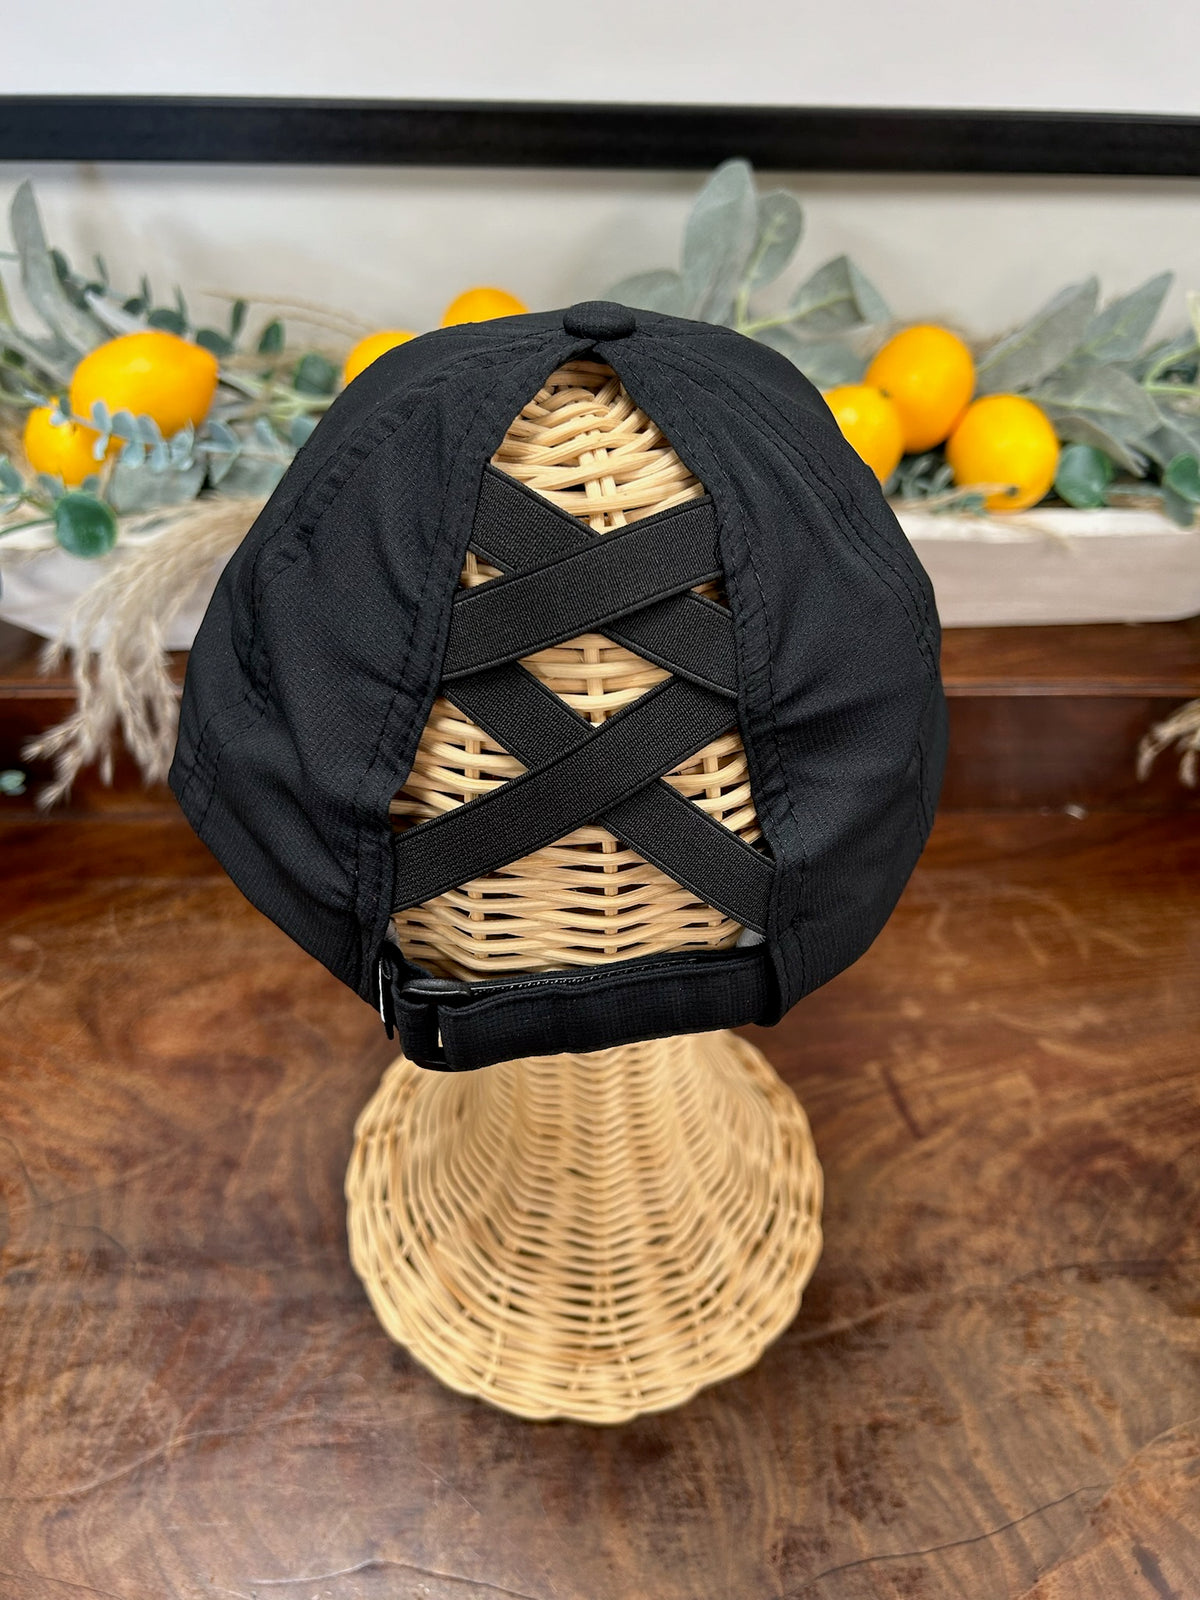 Ponytail Hat in Black & Orange by The Cincy Hat--Lemons and Limes Boutique